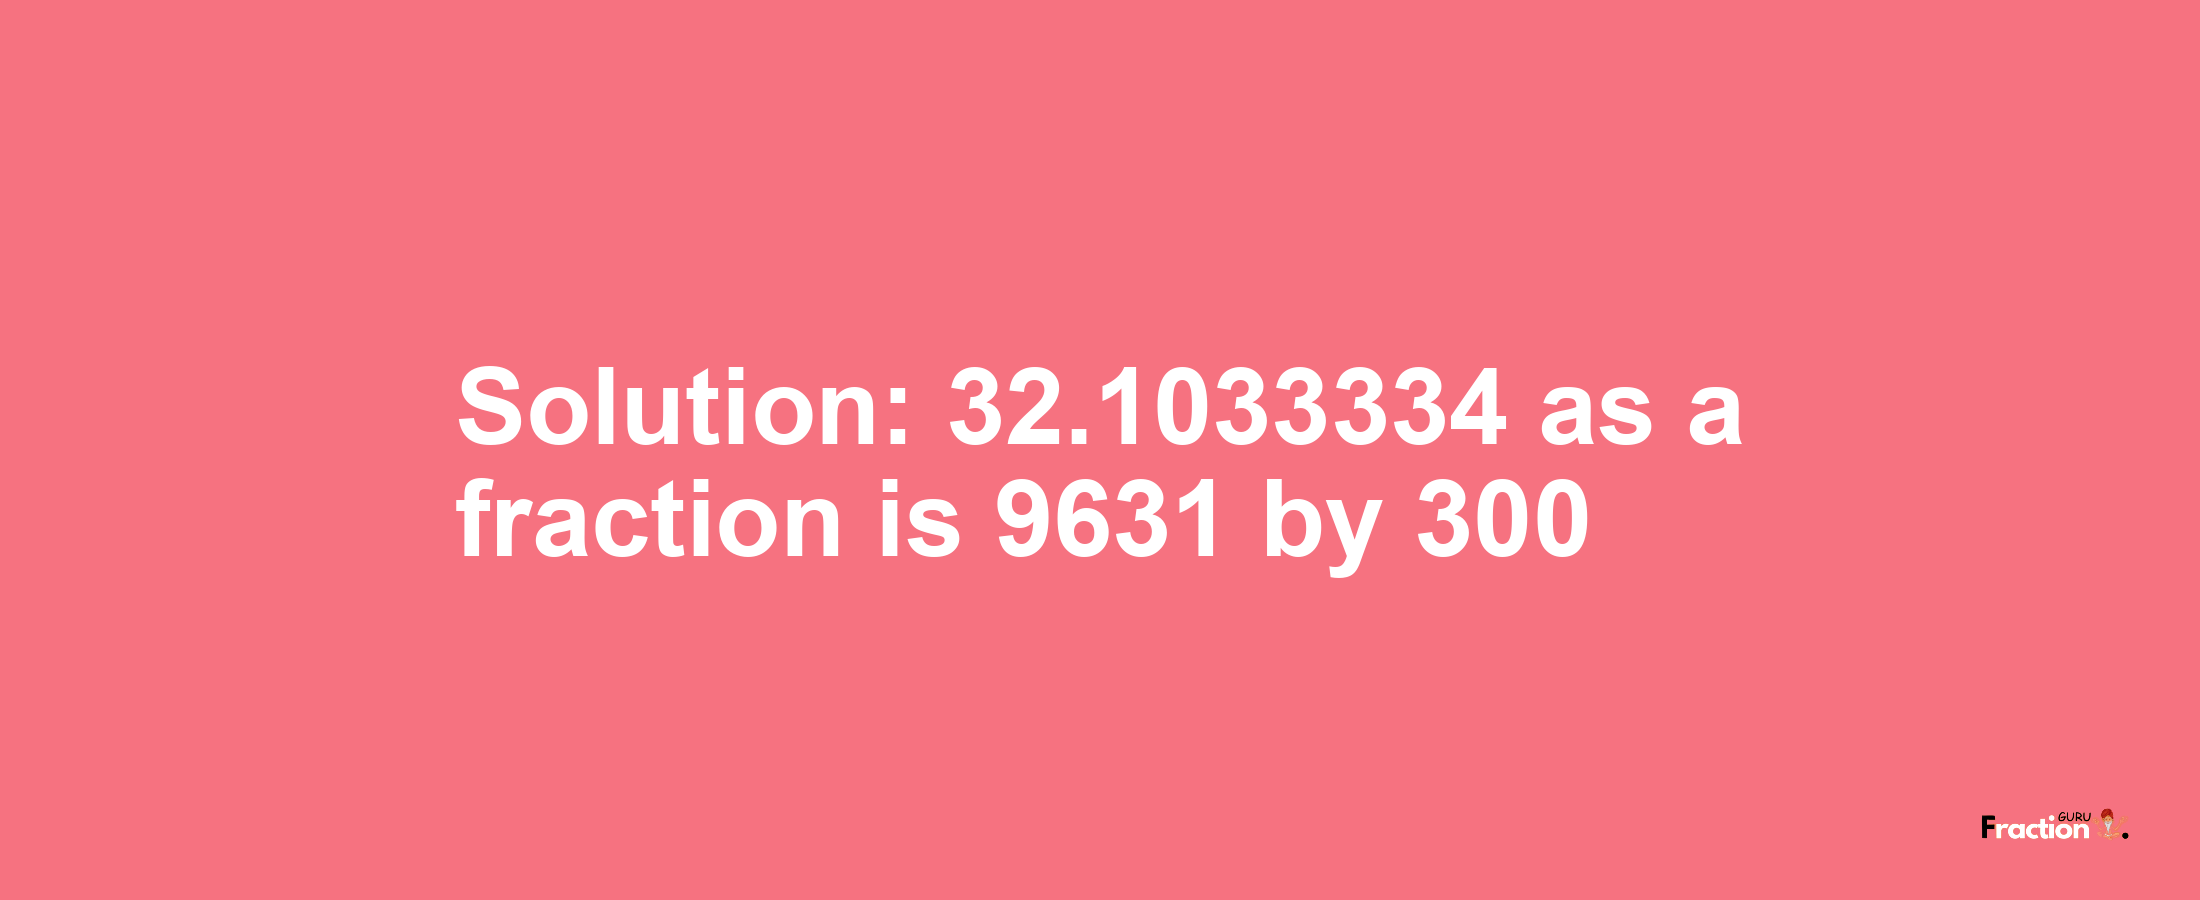 Solution:32.1033334 as a fraction is 9631/300